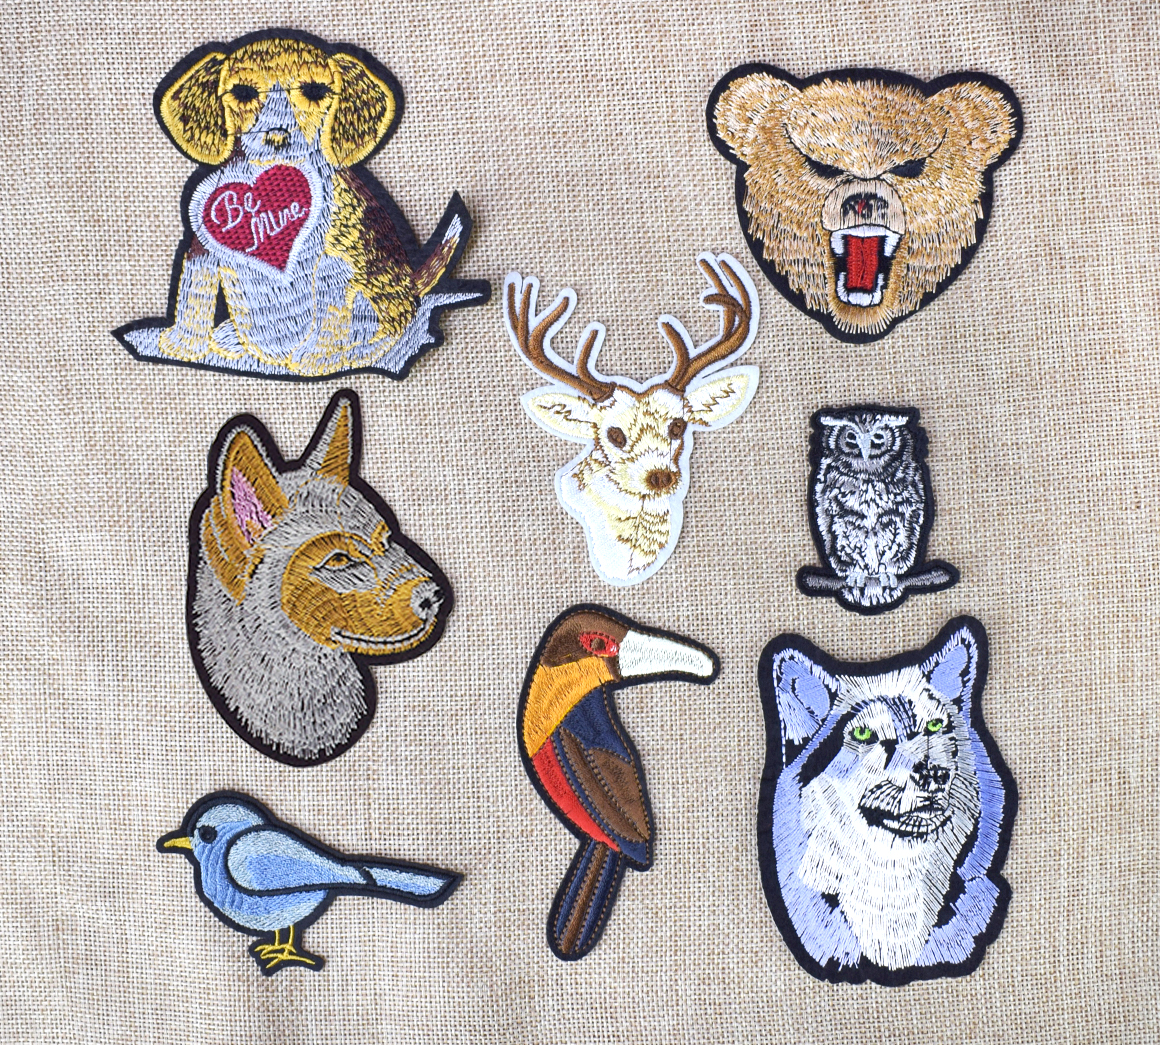 

Animal Stripe Embroidery Clothing Patches for baby Attire Iron on Transfer Applique Patches for Fabrics Badge Apparel Accessories Patch10PCS